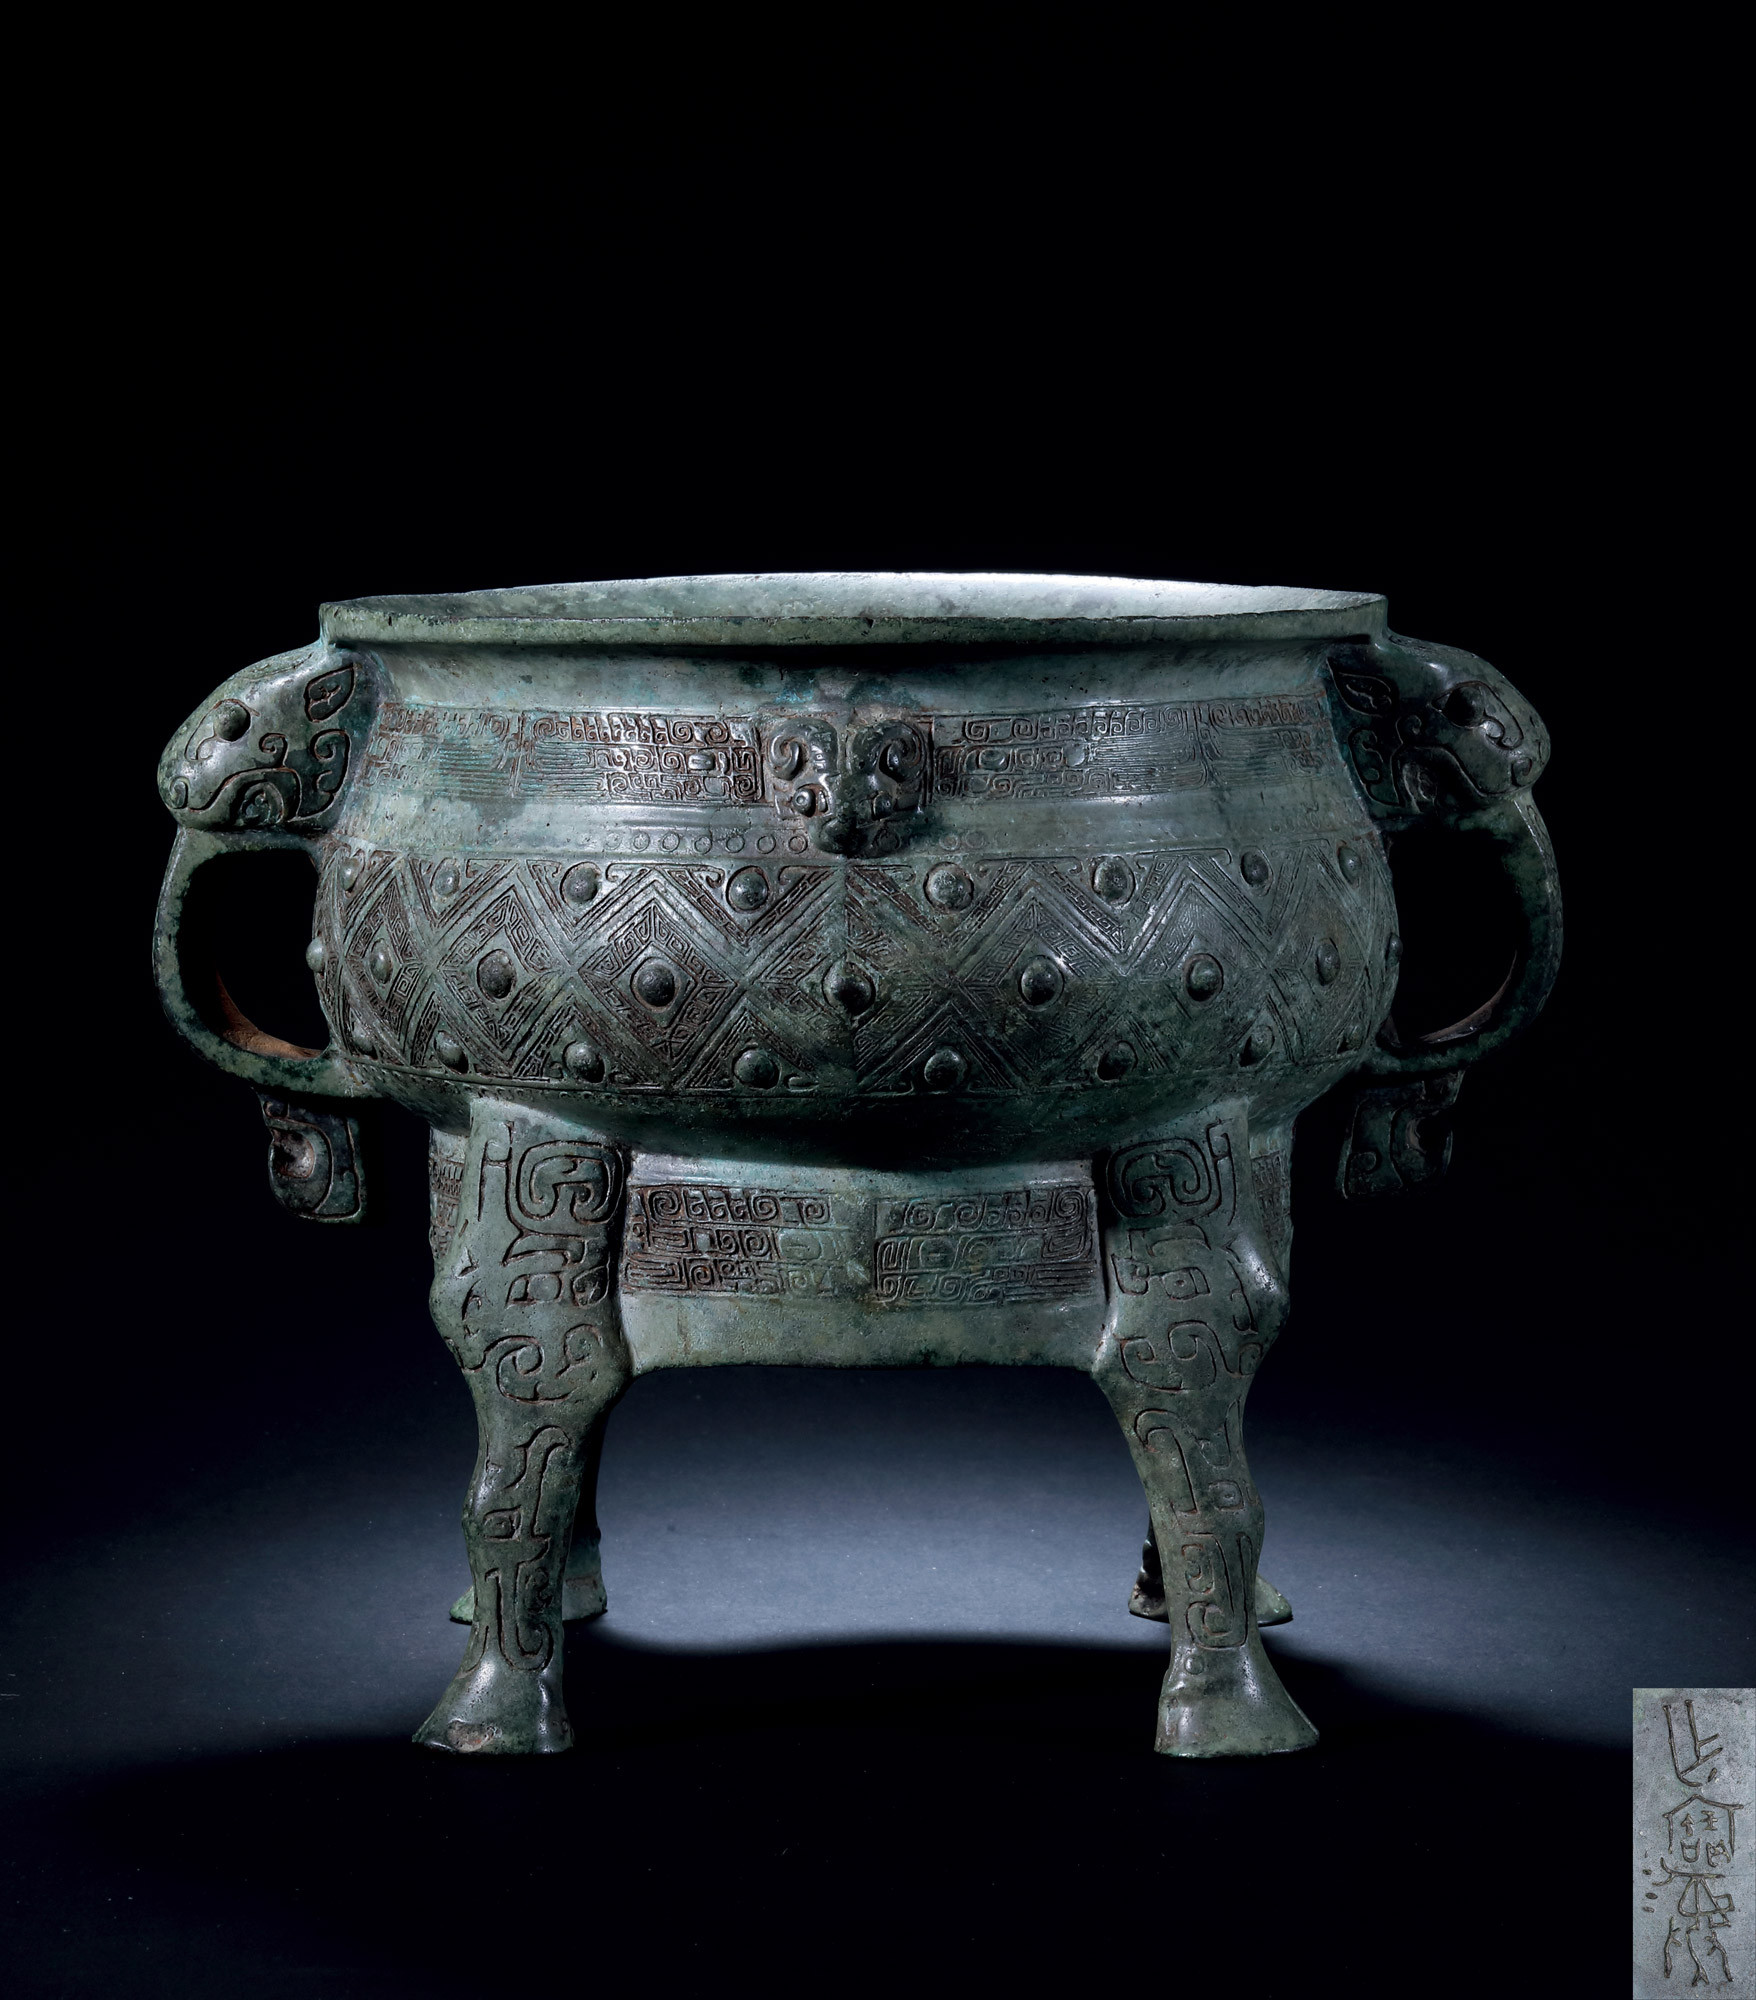 AN EXTREMELY RARE AND VERY IMPORTANT BRONZE VASE WITH INSCRIPTION, GUI